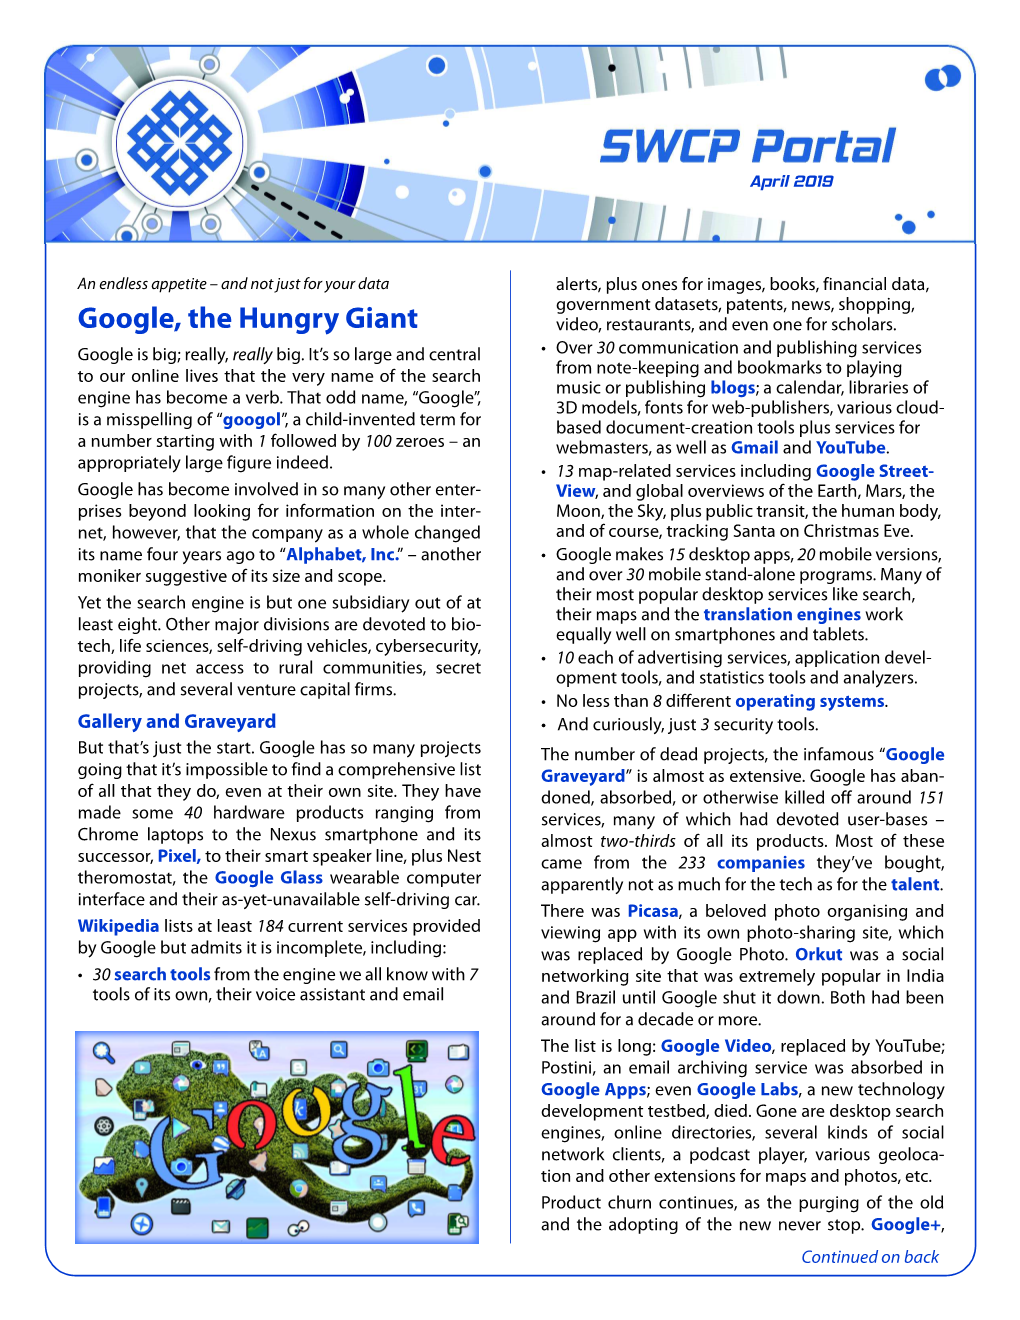 Google, the Hungry Giant Video, Restaurants, and Even One for Scholars